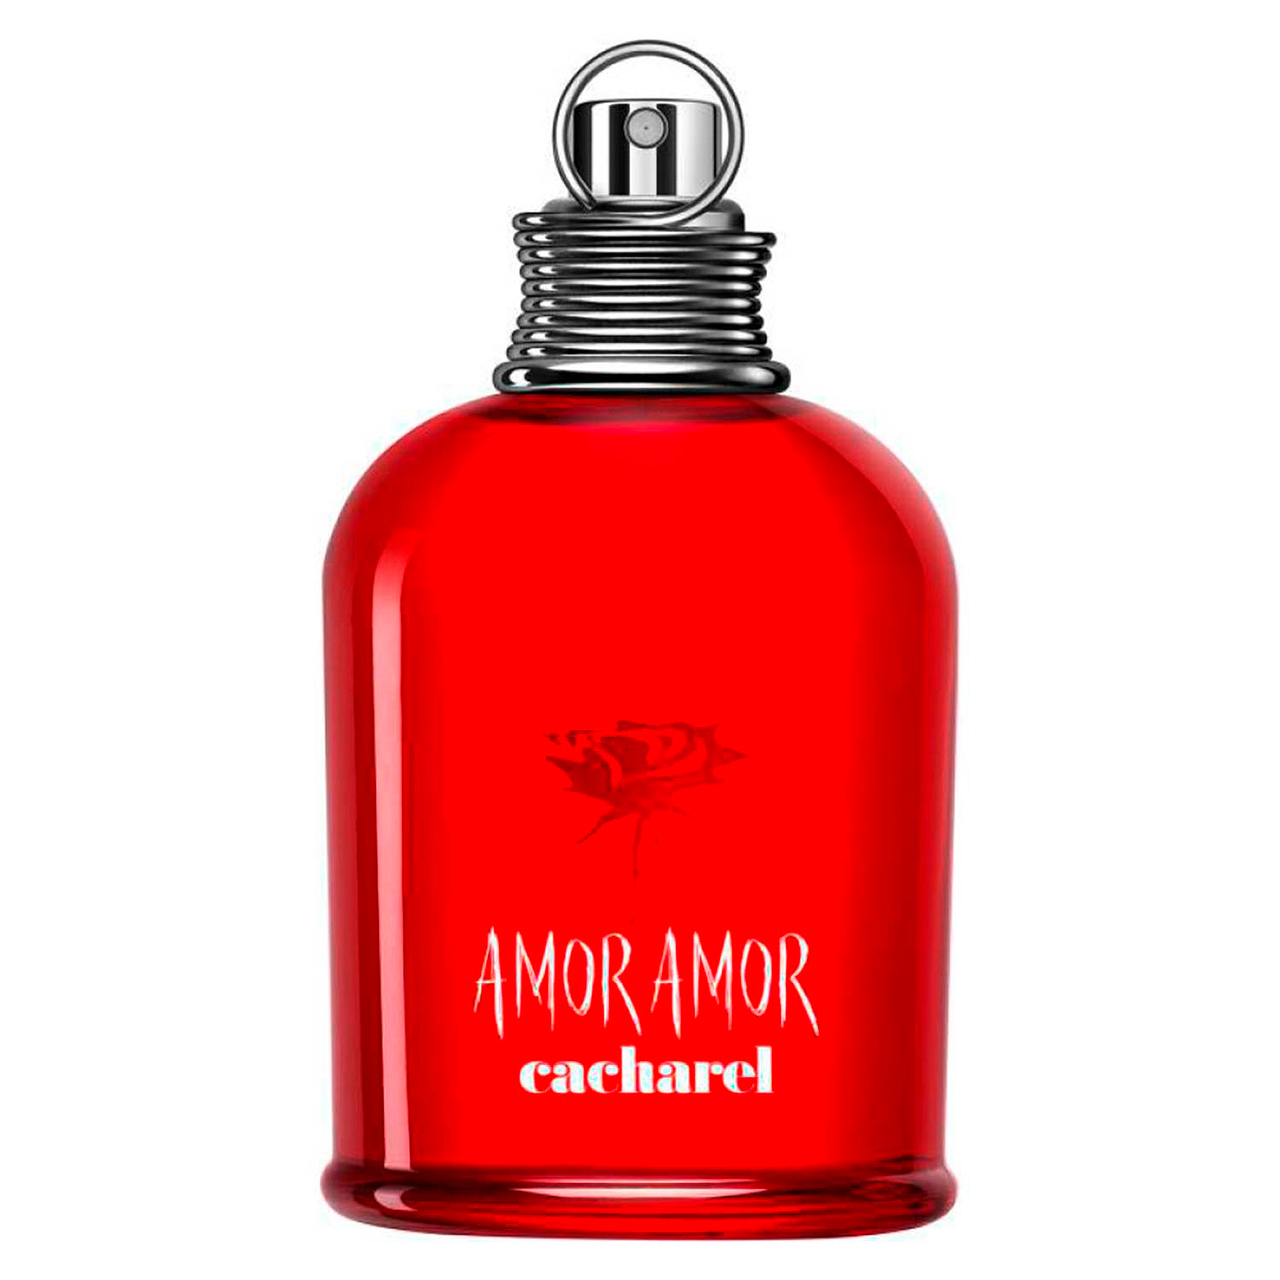 PF M PERF IND CACHAREL AMOR AMOR 100ML